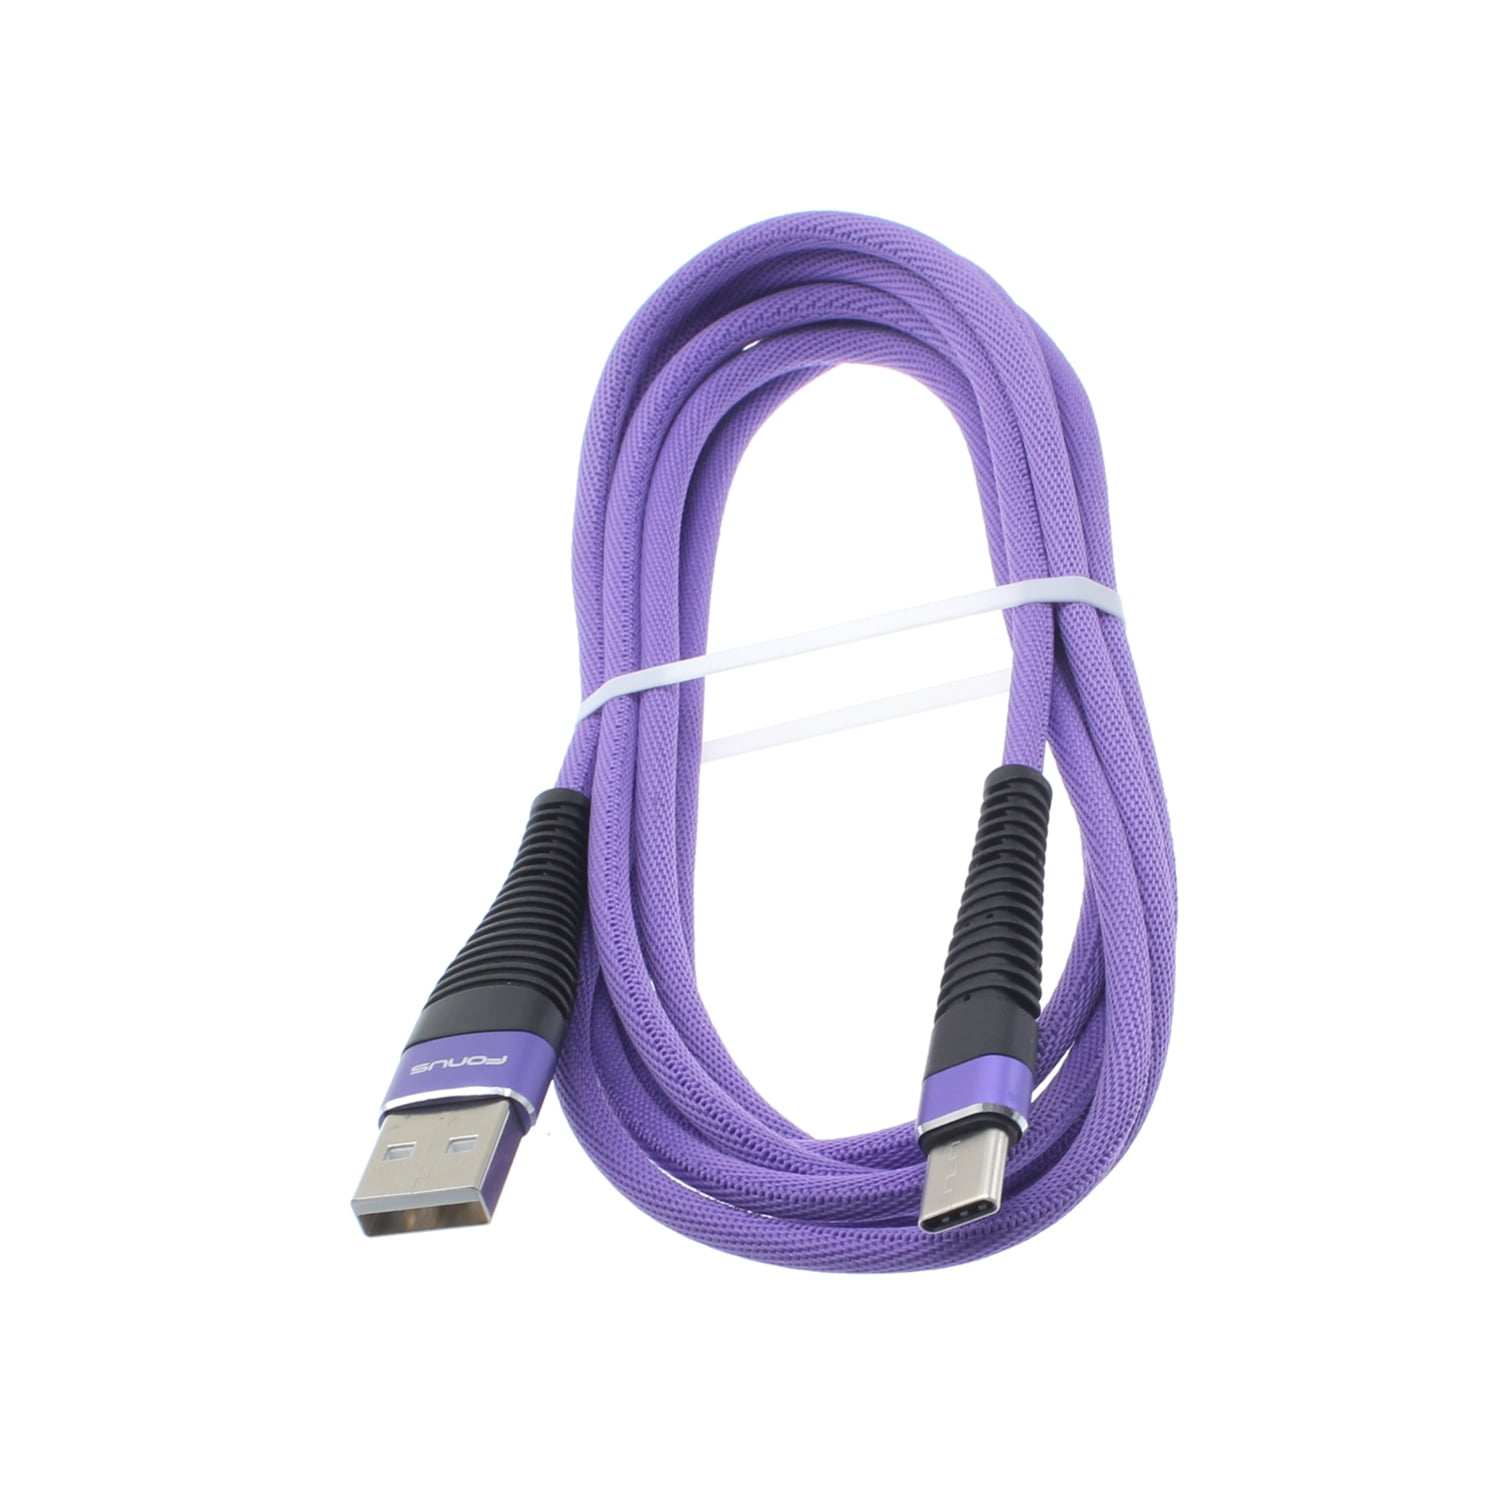 Moto G7 Power Purple 10ft USB Cable, TypeC Charger Cord